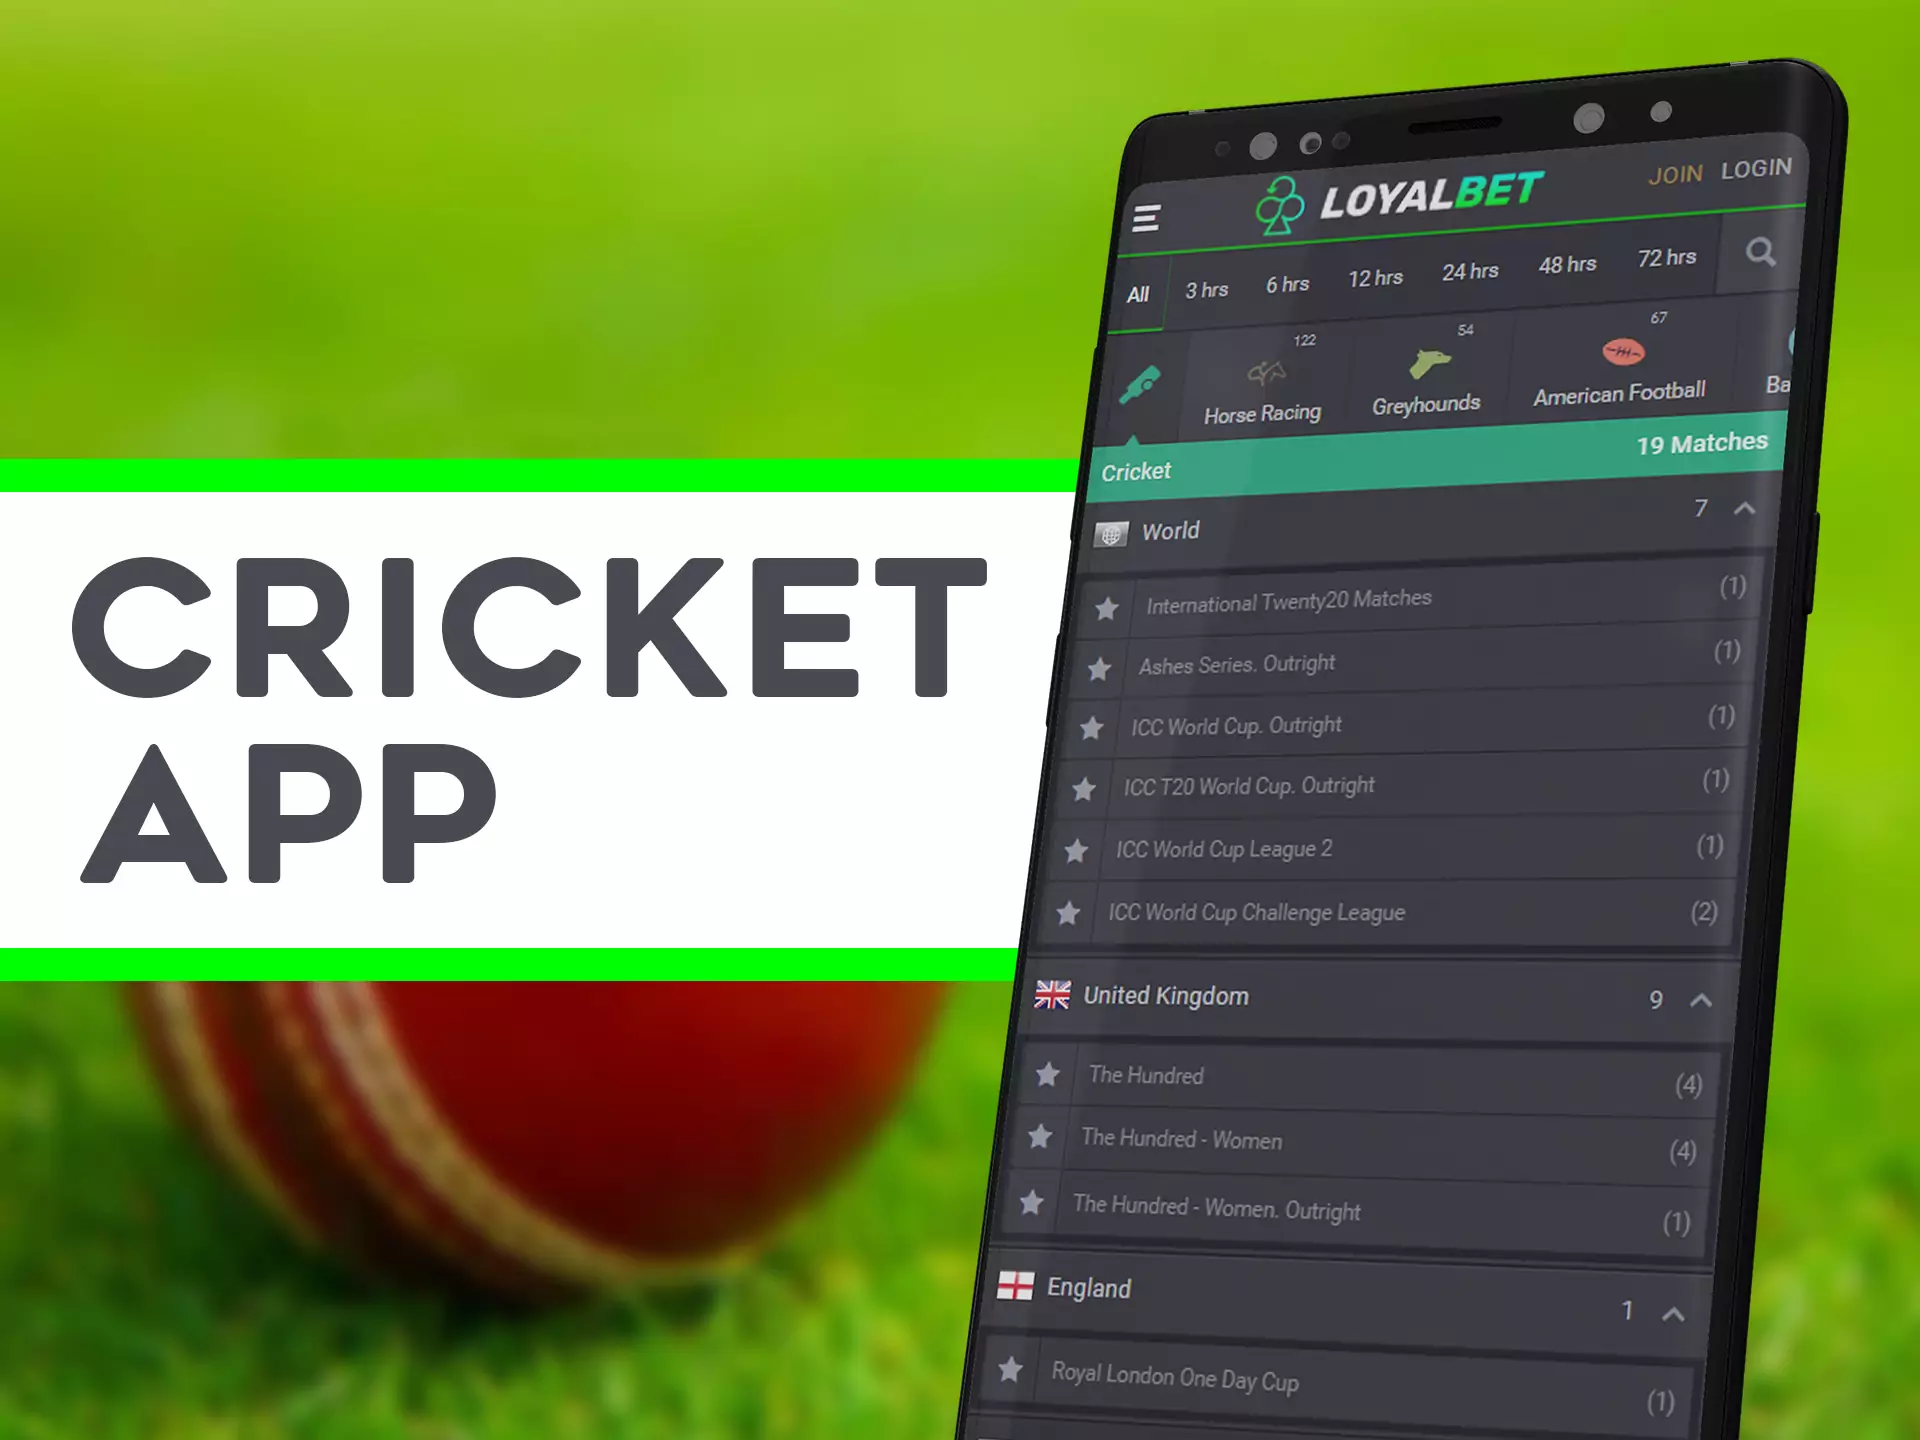 Watch and bet on cricket games in app.